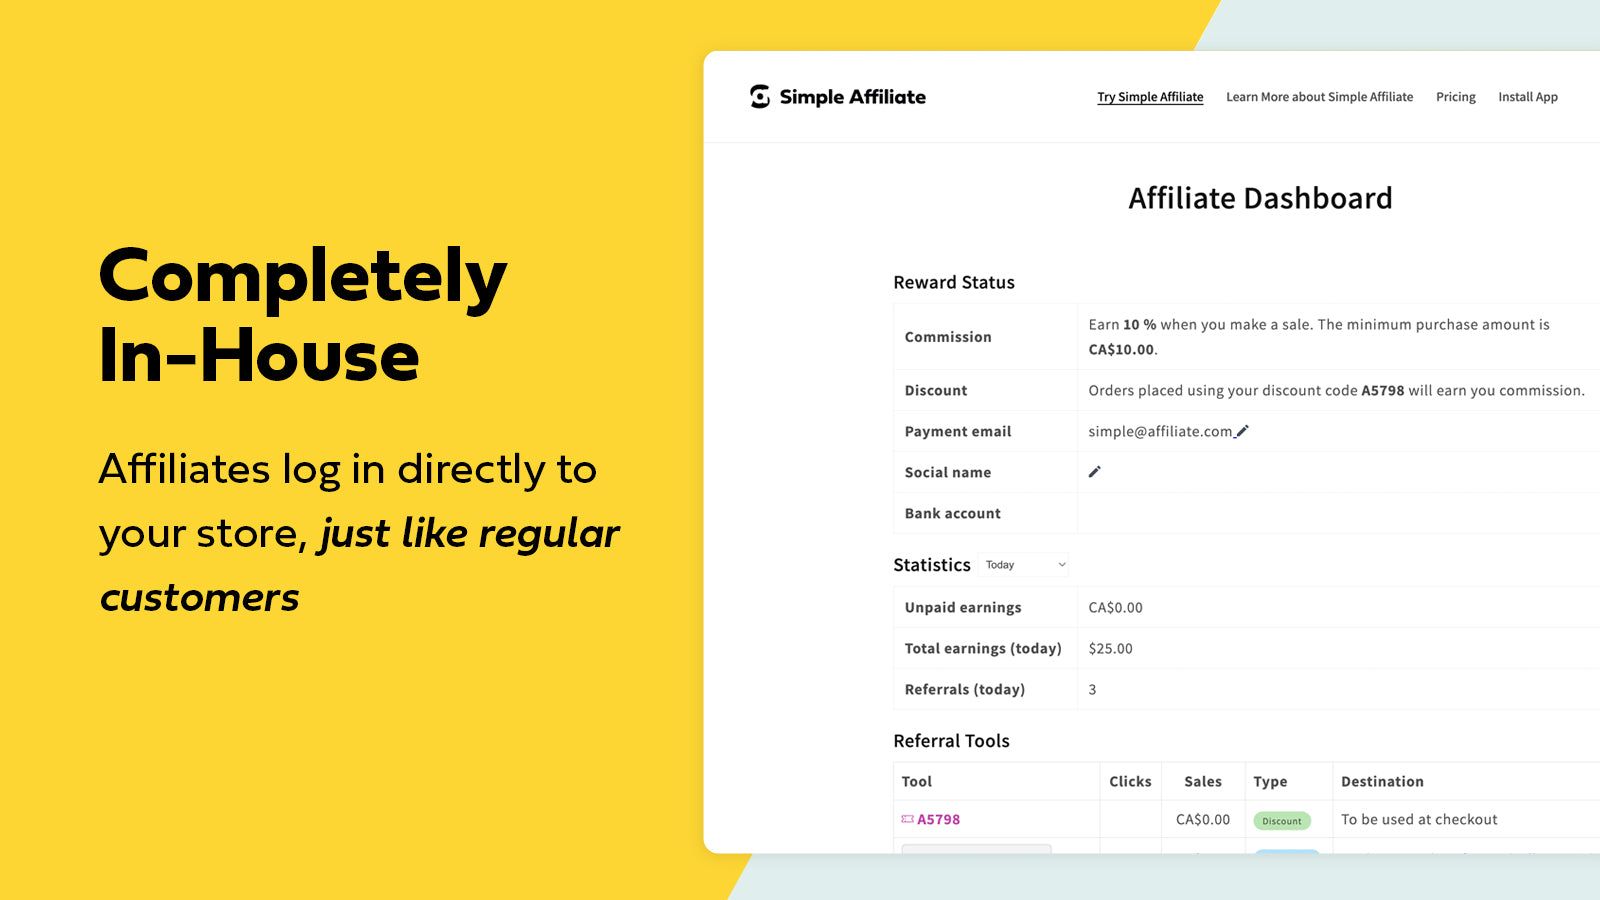 Completely In-House - Affiliates log directly into your store